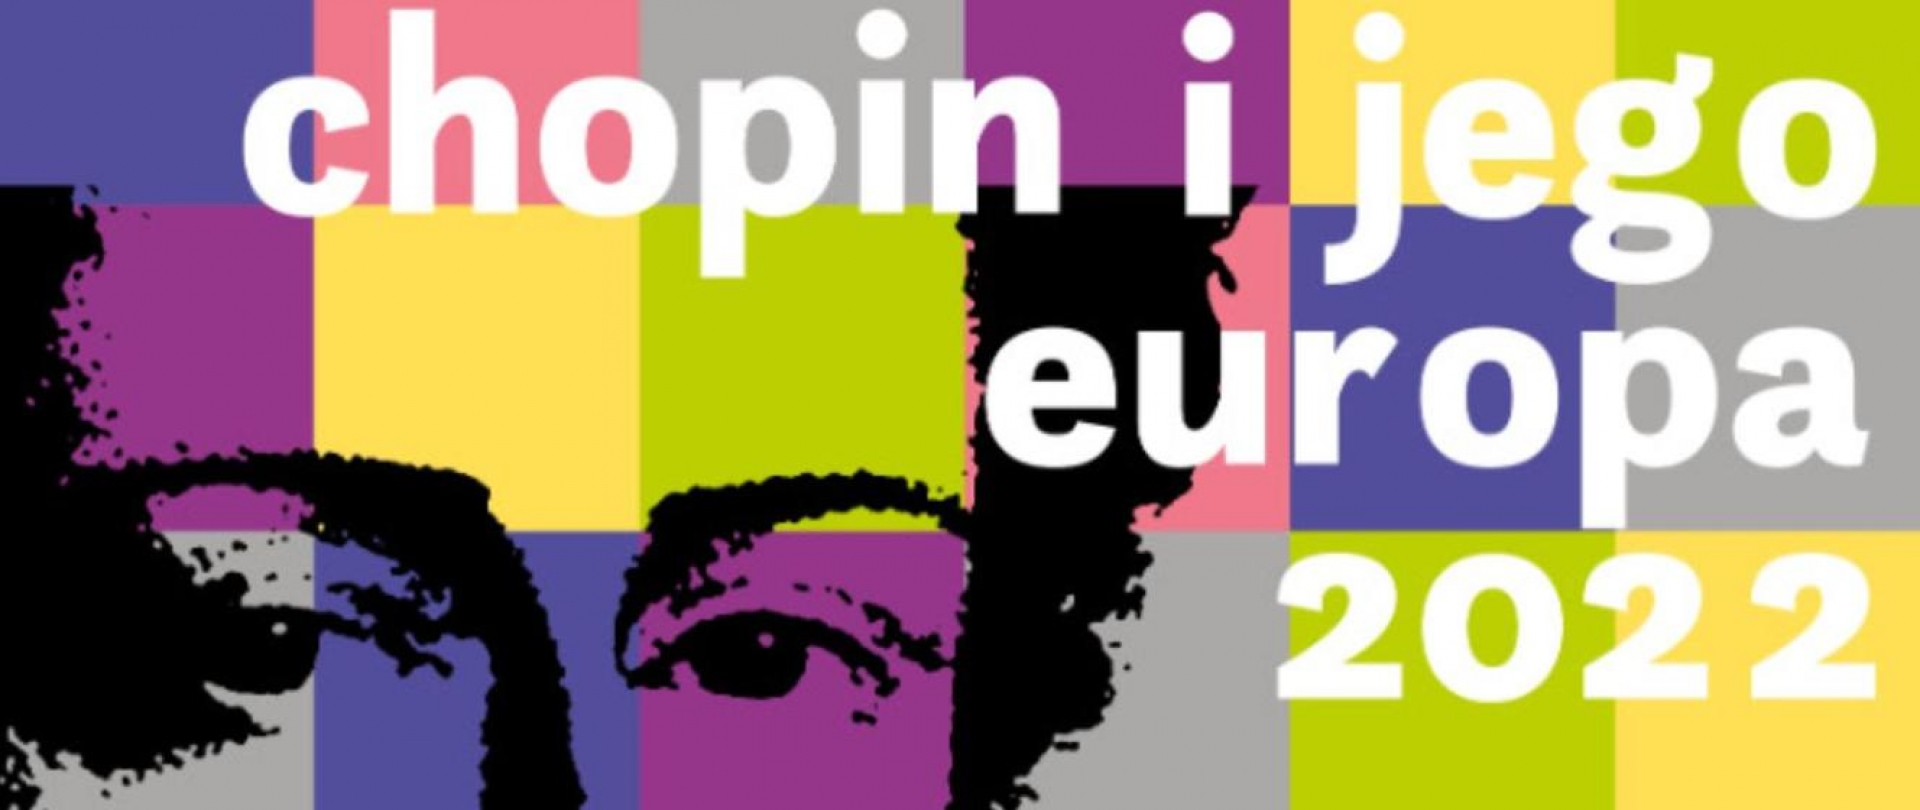 15.08.2022 18. Chopin and his Europe International Music Festival, Warsaw